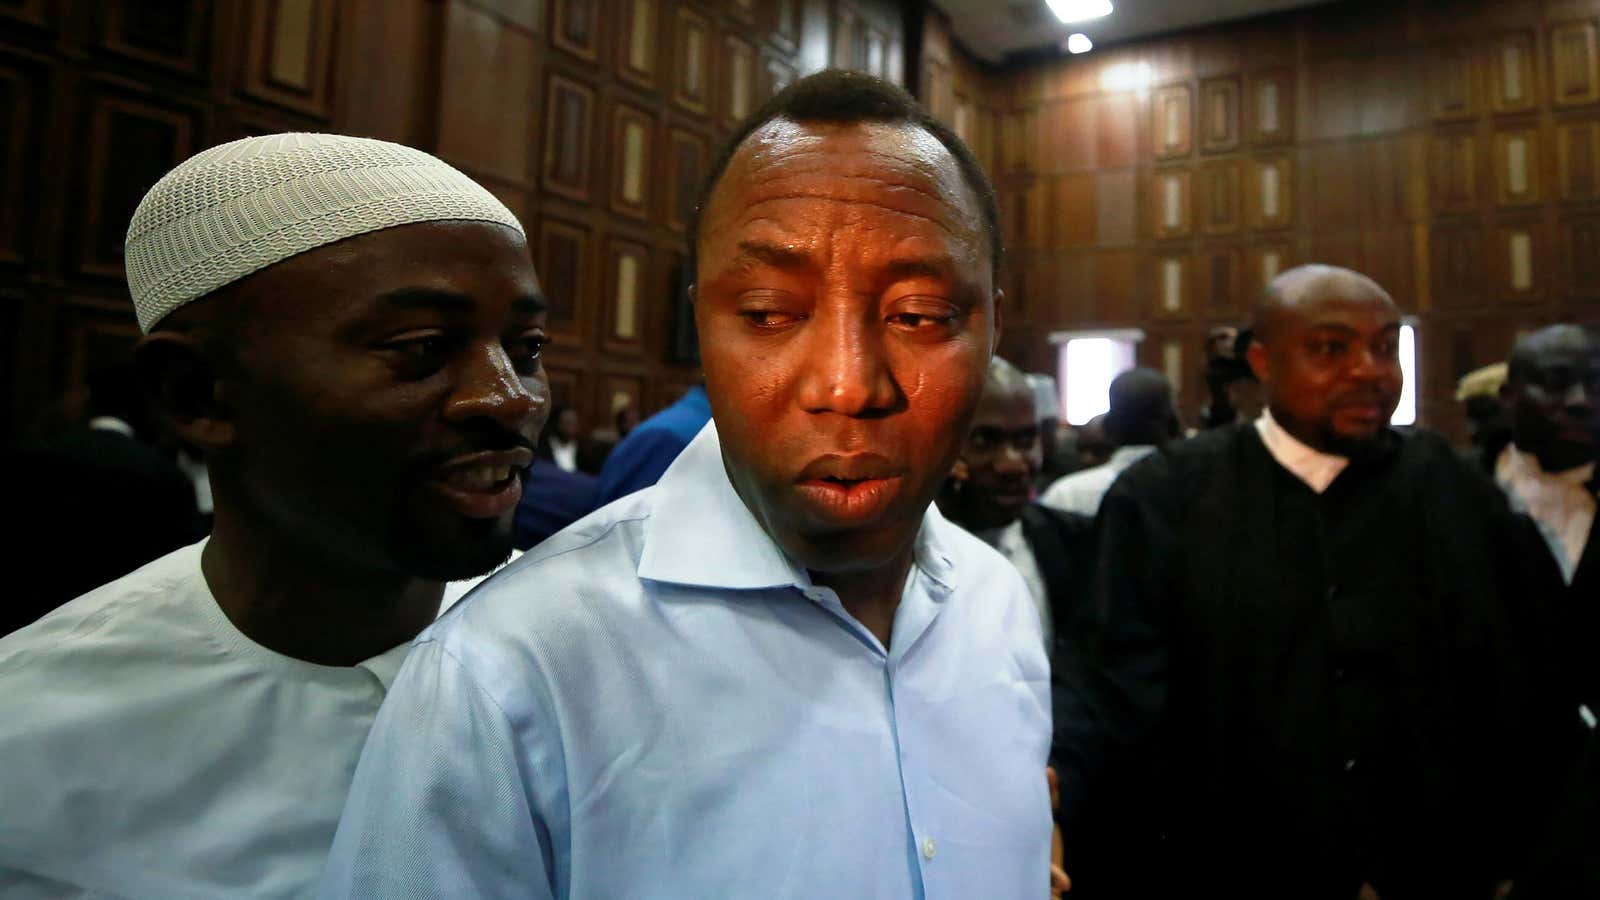 Publisher of Sahara Reporters Omoyele Sowore arrives at the Federal High Court in Abuja, Nigeria Sept. 30, 2019.